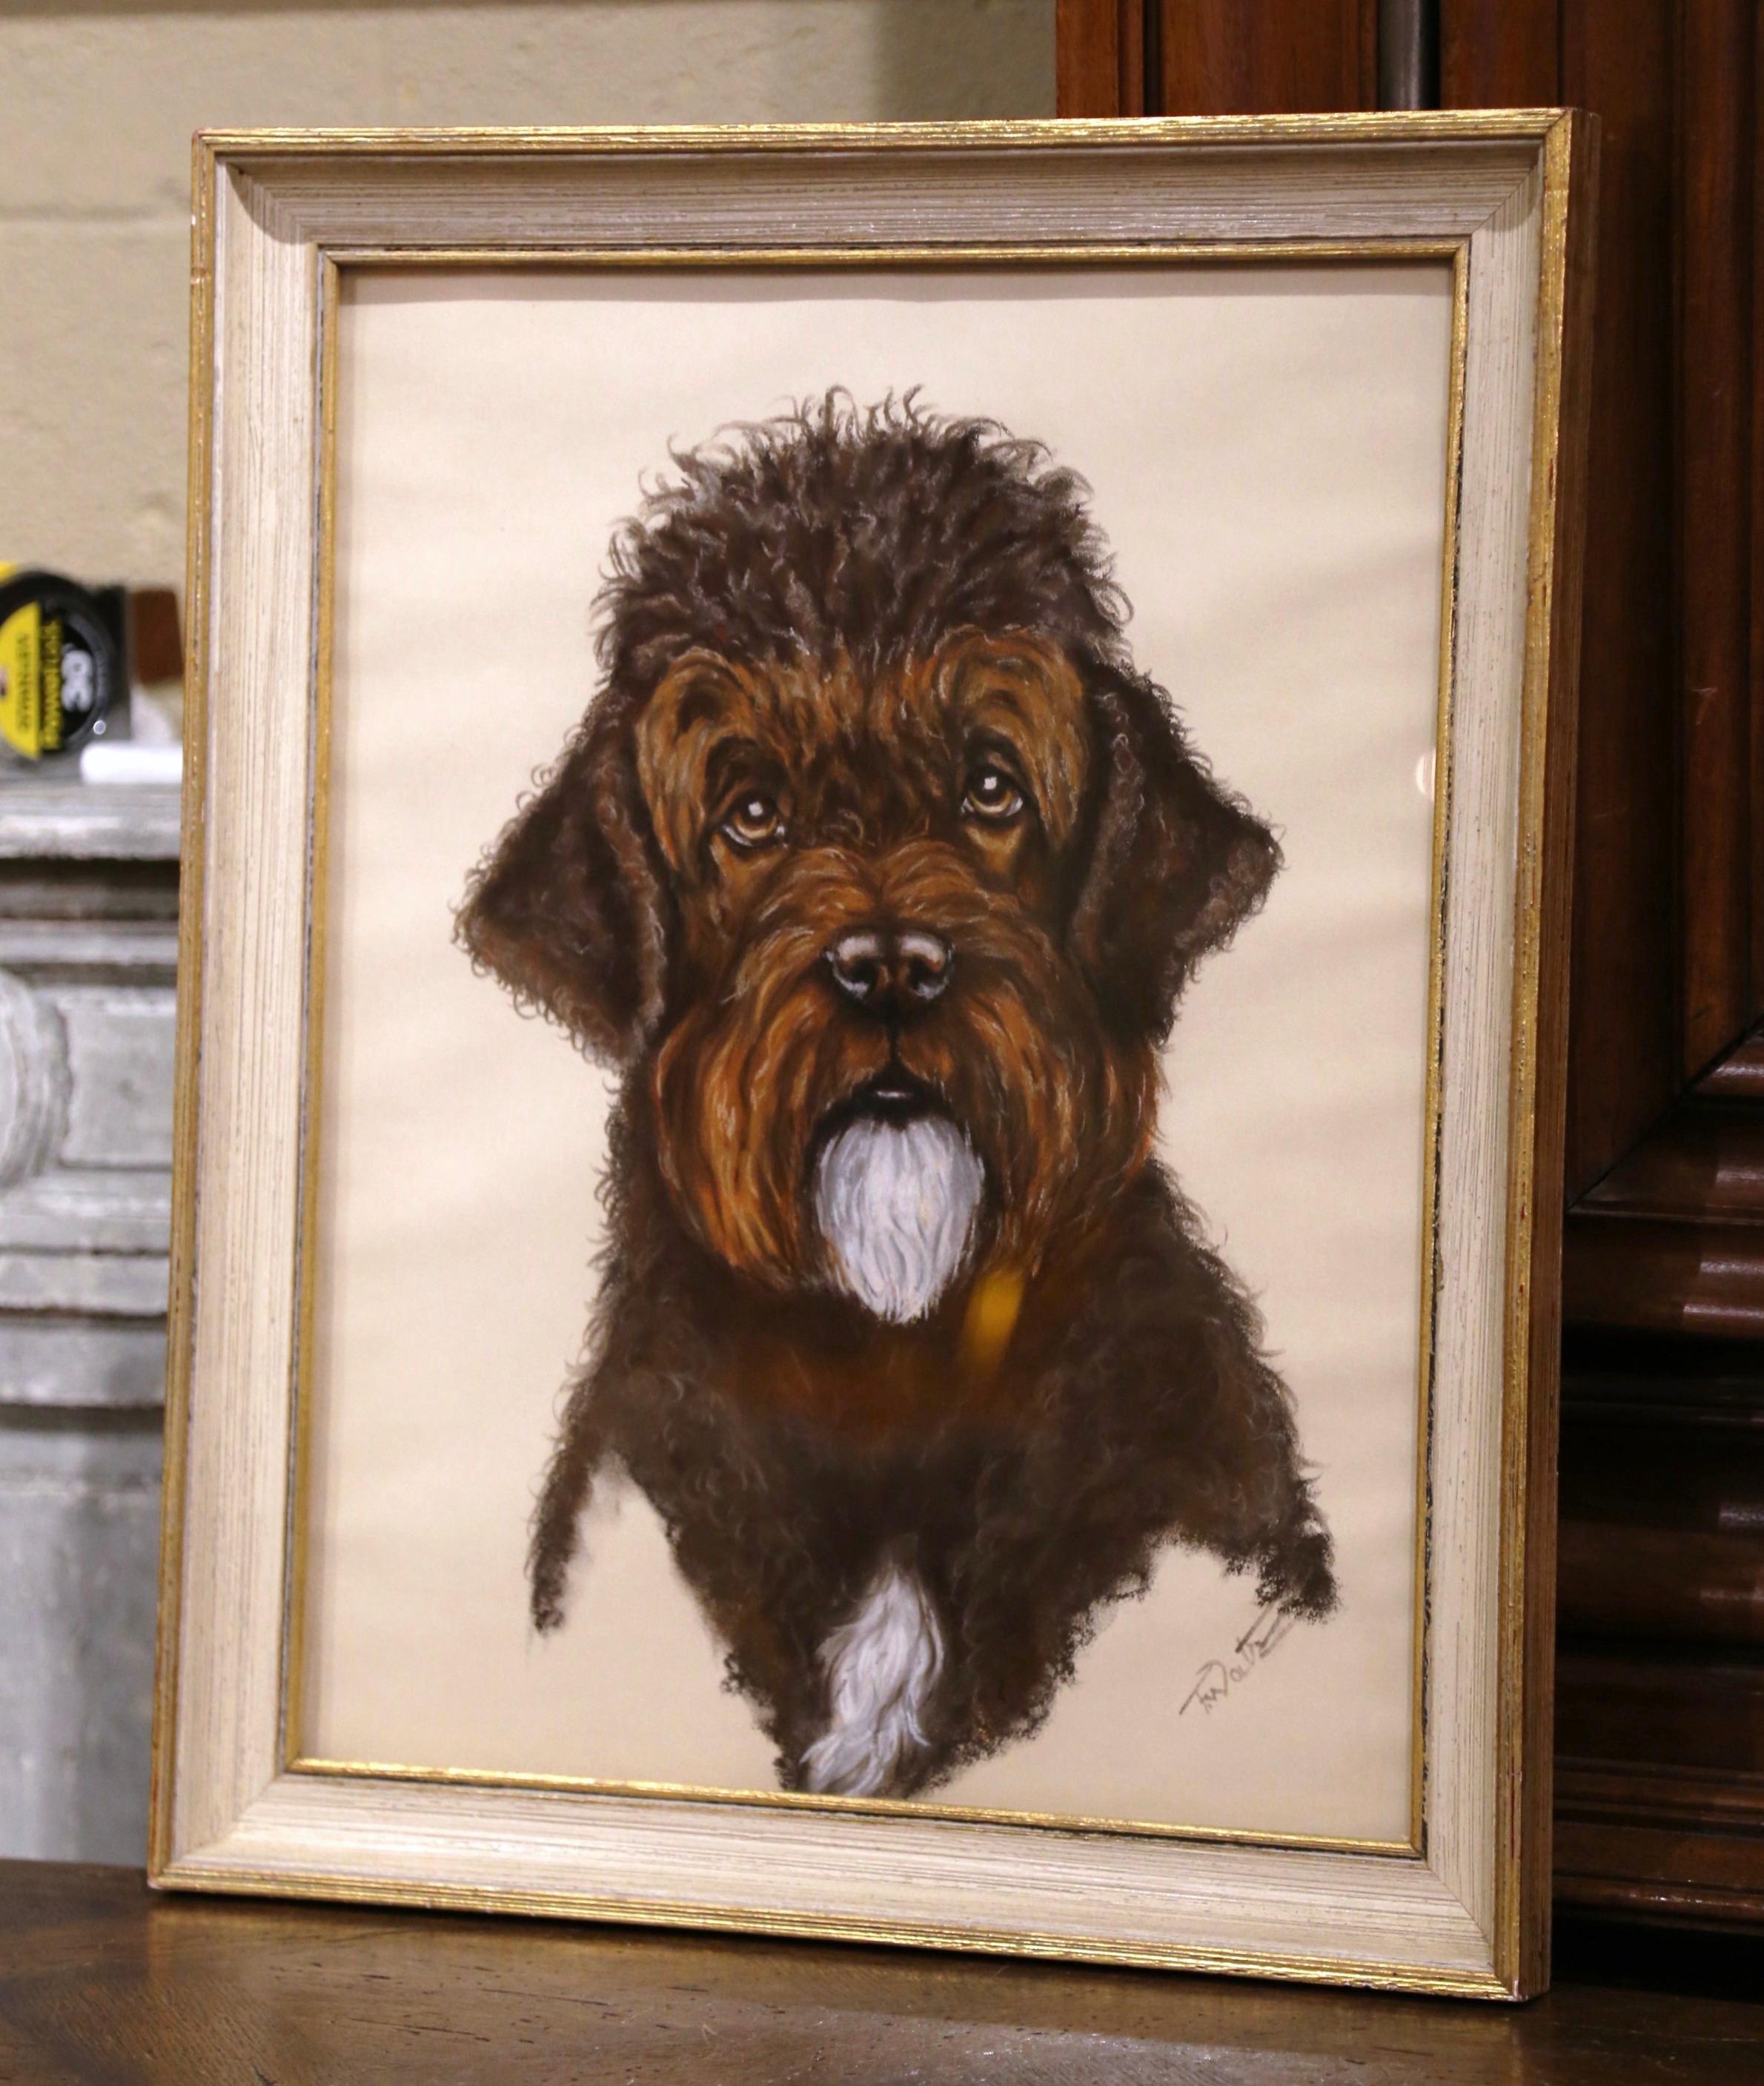 Decorate an office or a den with this elegant framed dog painting. Created in England circa 1880, and set in the original carved frame, the drawing depicts a cocker spaniel poodle mix portrait. The artwork is signed in the lower right corner by the